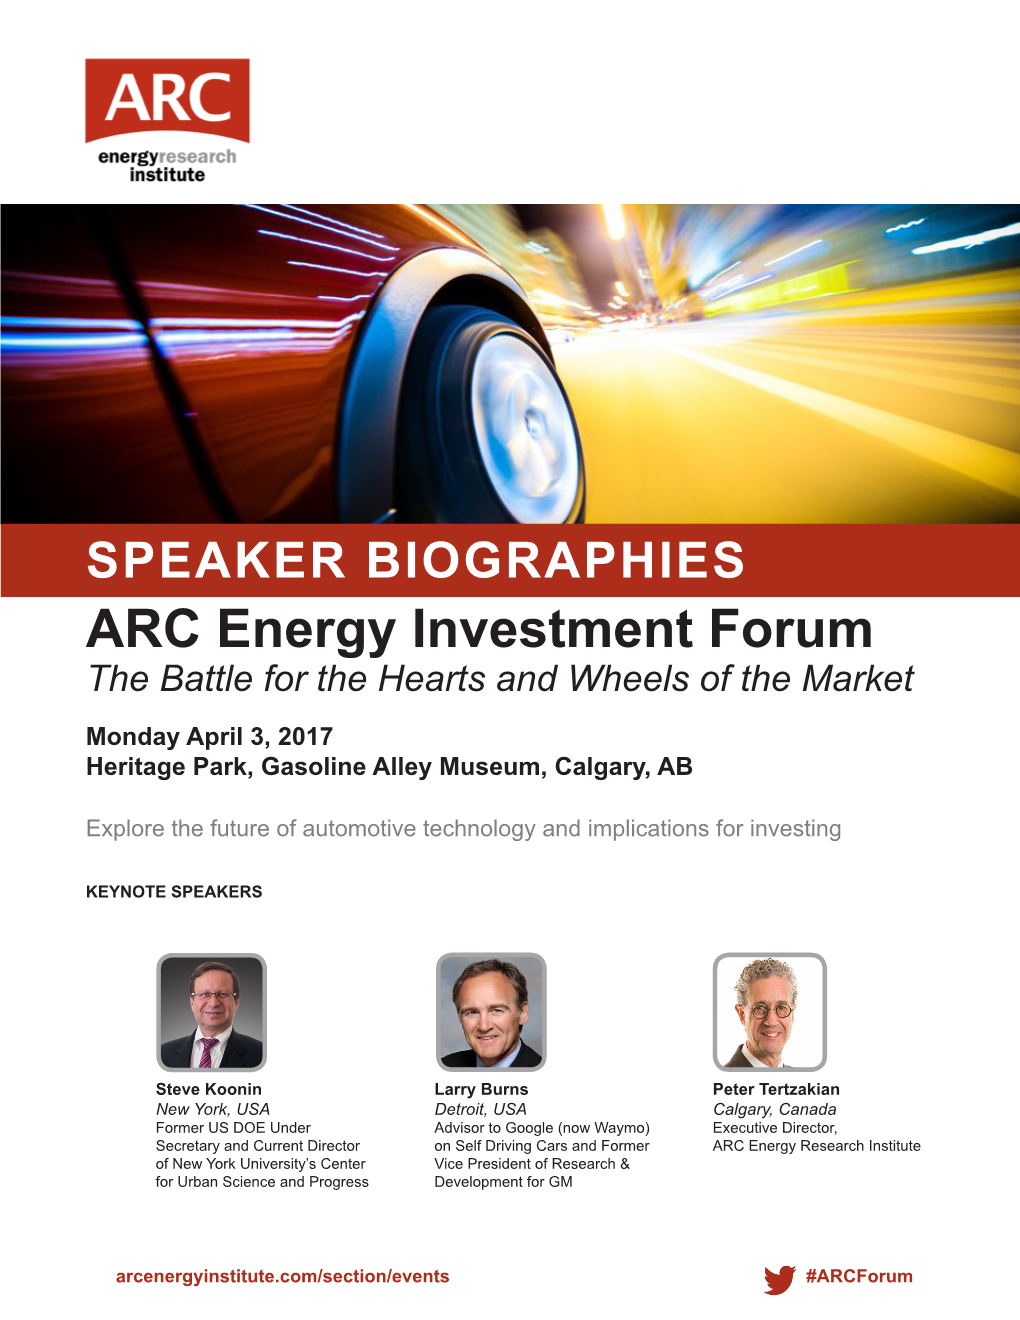 ARC Energy Investment Forum the Battle for the Hearts and Wheels of the Market